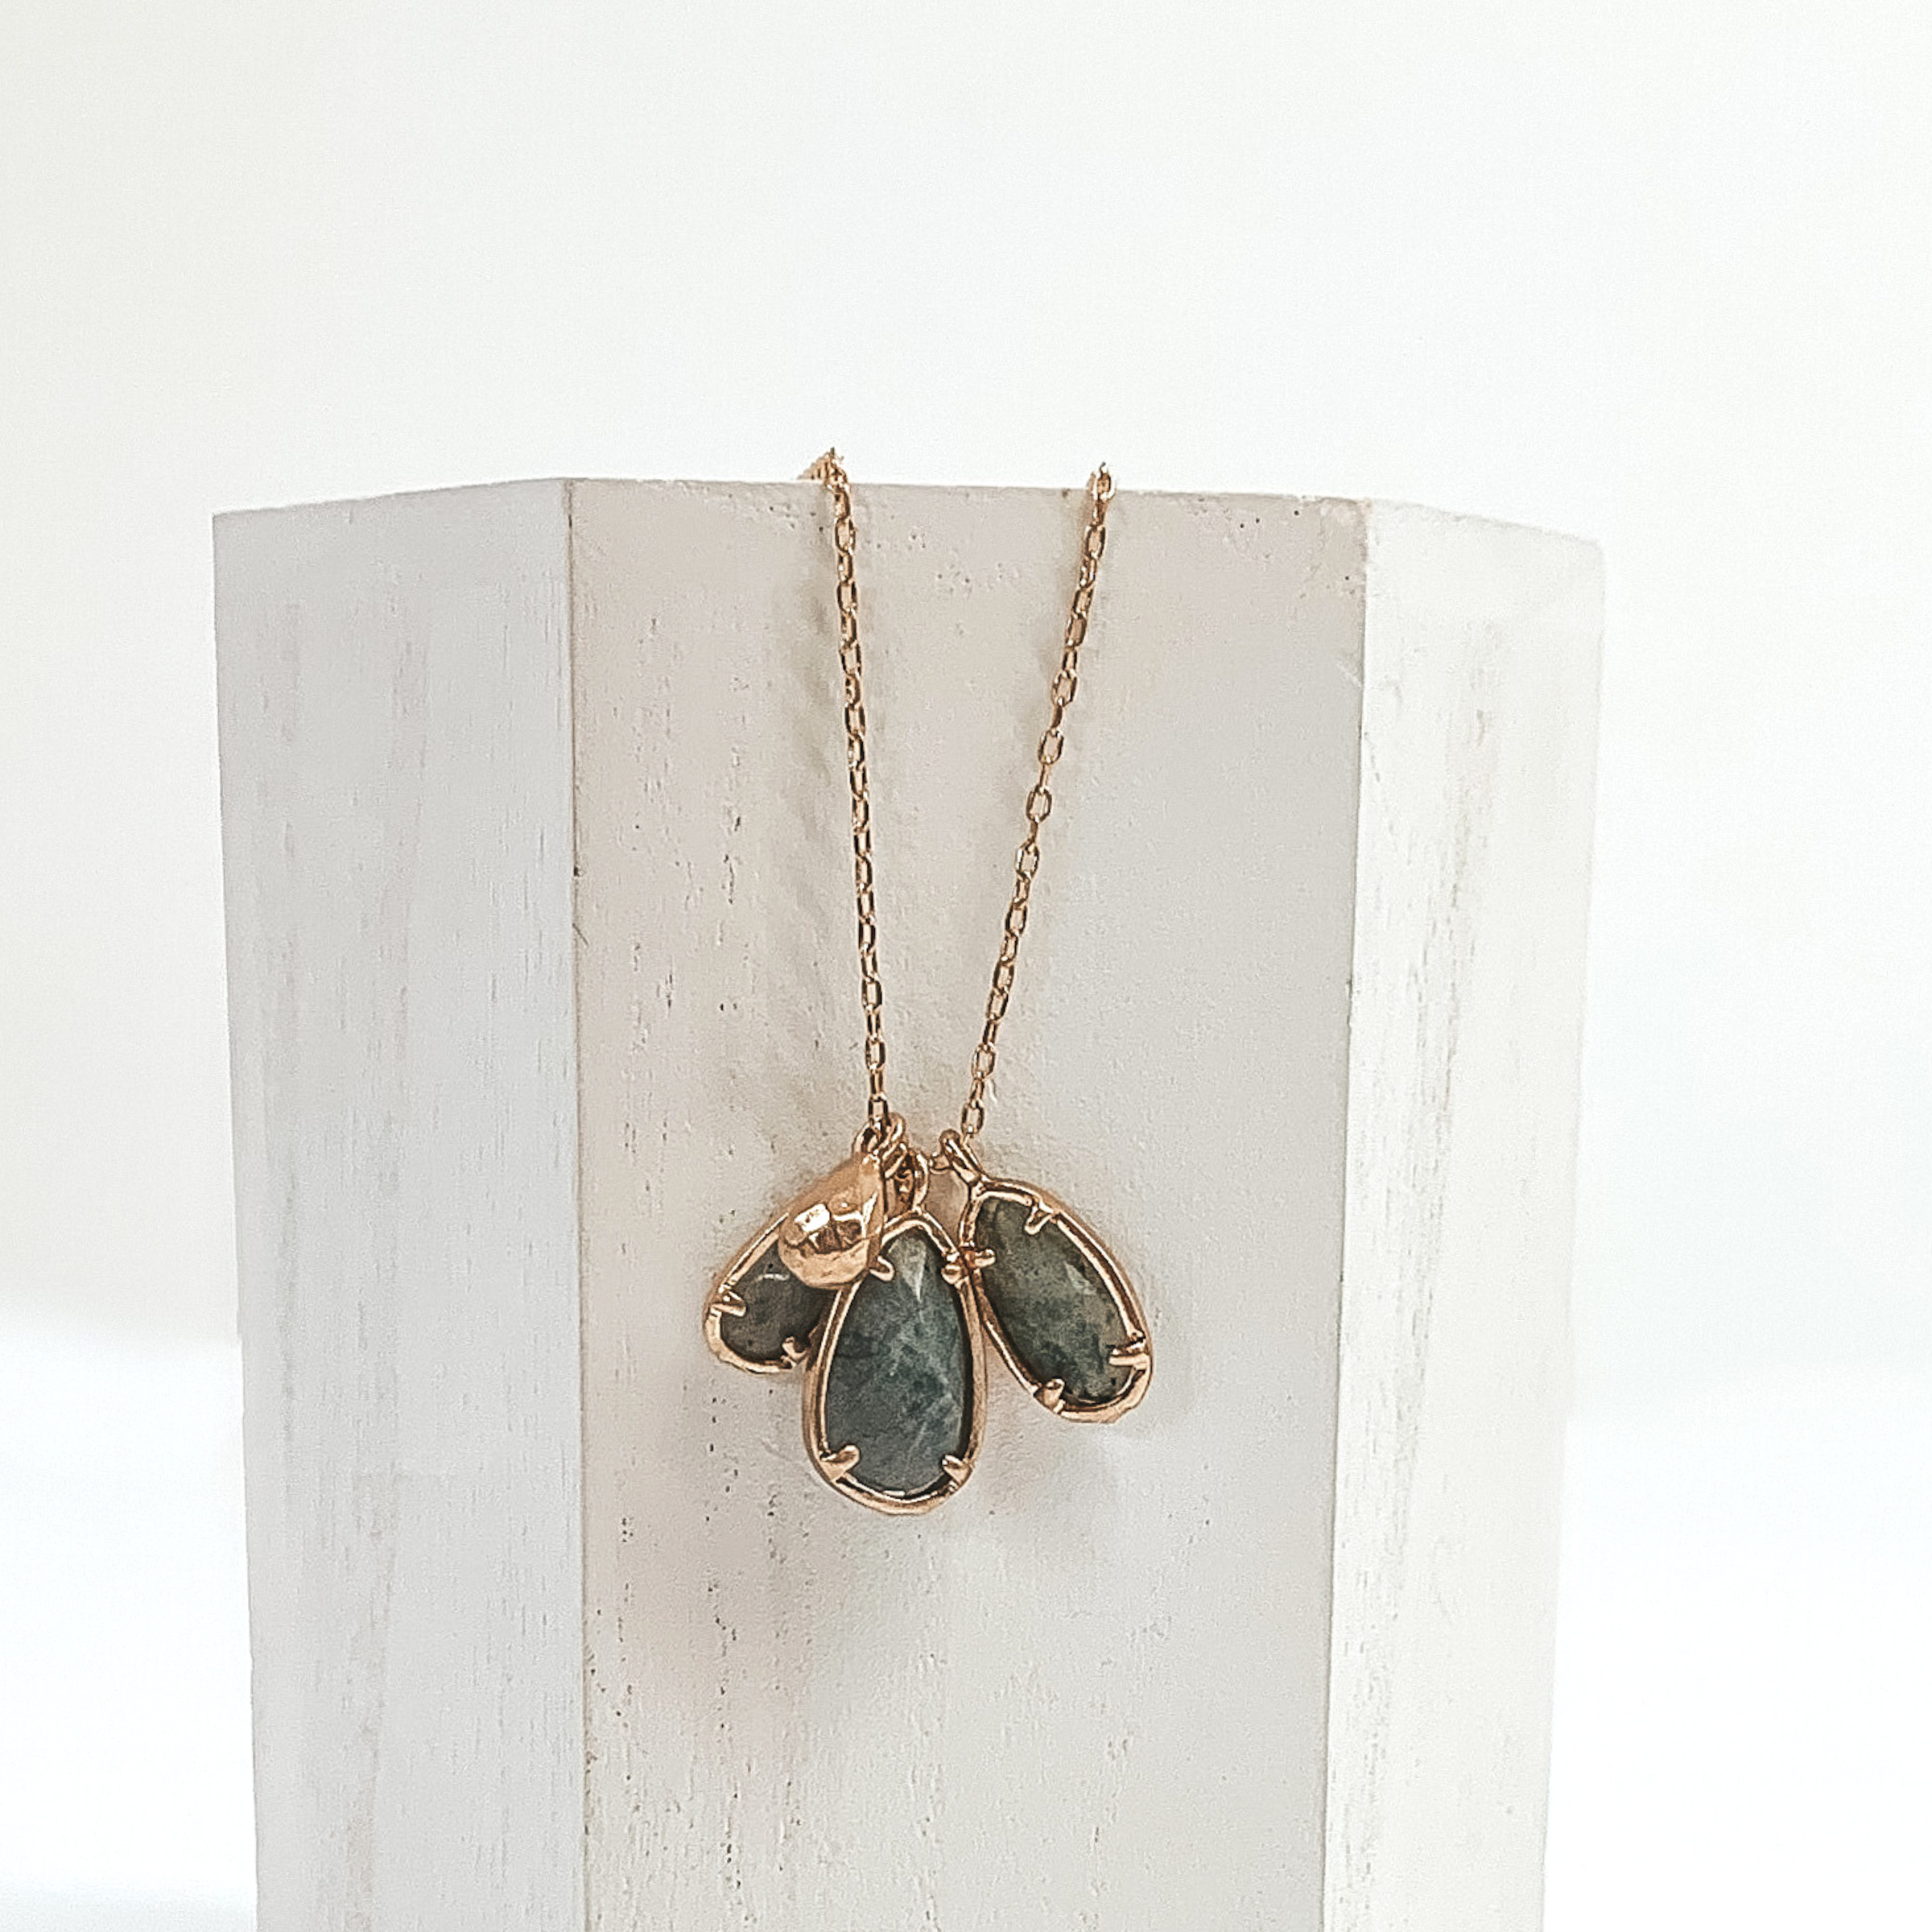 Small gold chain with three grey marbled teardrop stone pendants outlined in gold. It also has a tiny gold teardrop pendant. This necklace is pictured laying a white piece of wood on a white background.